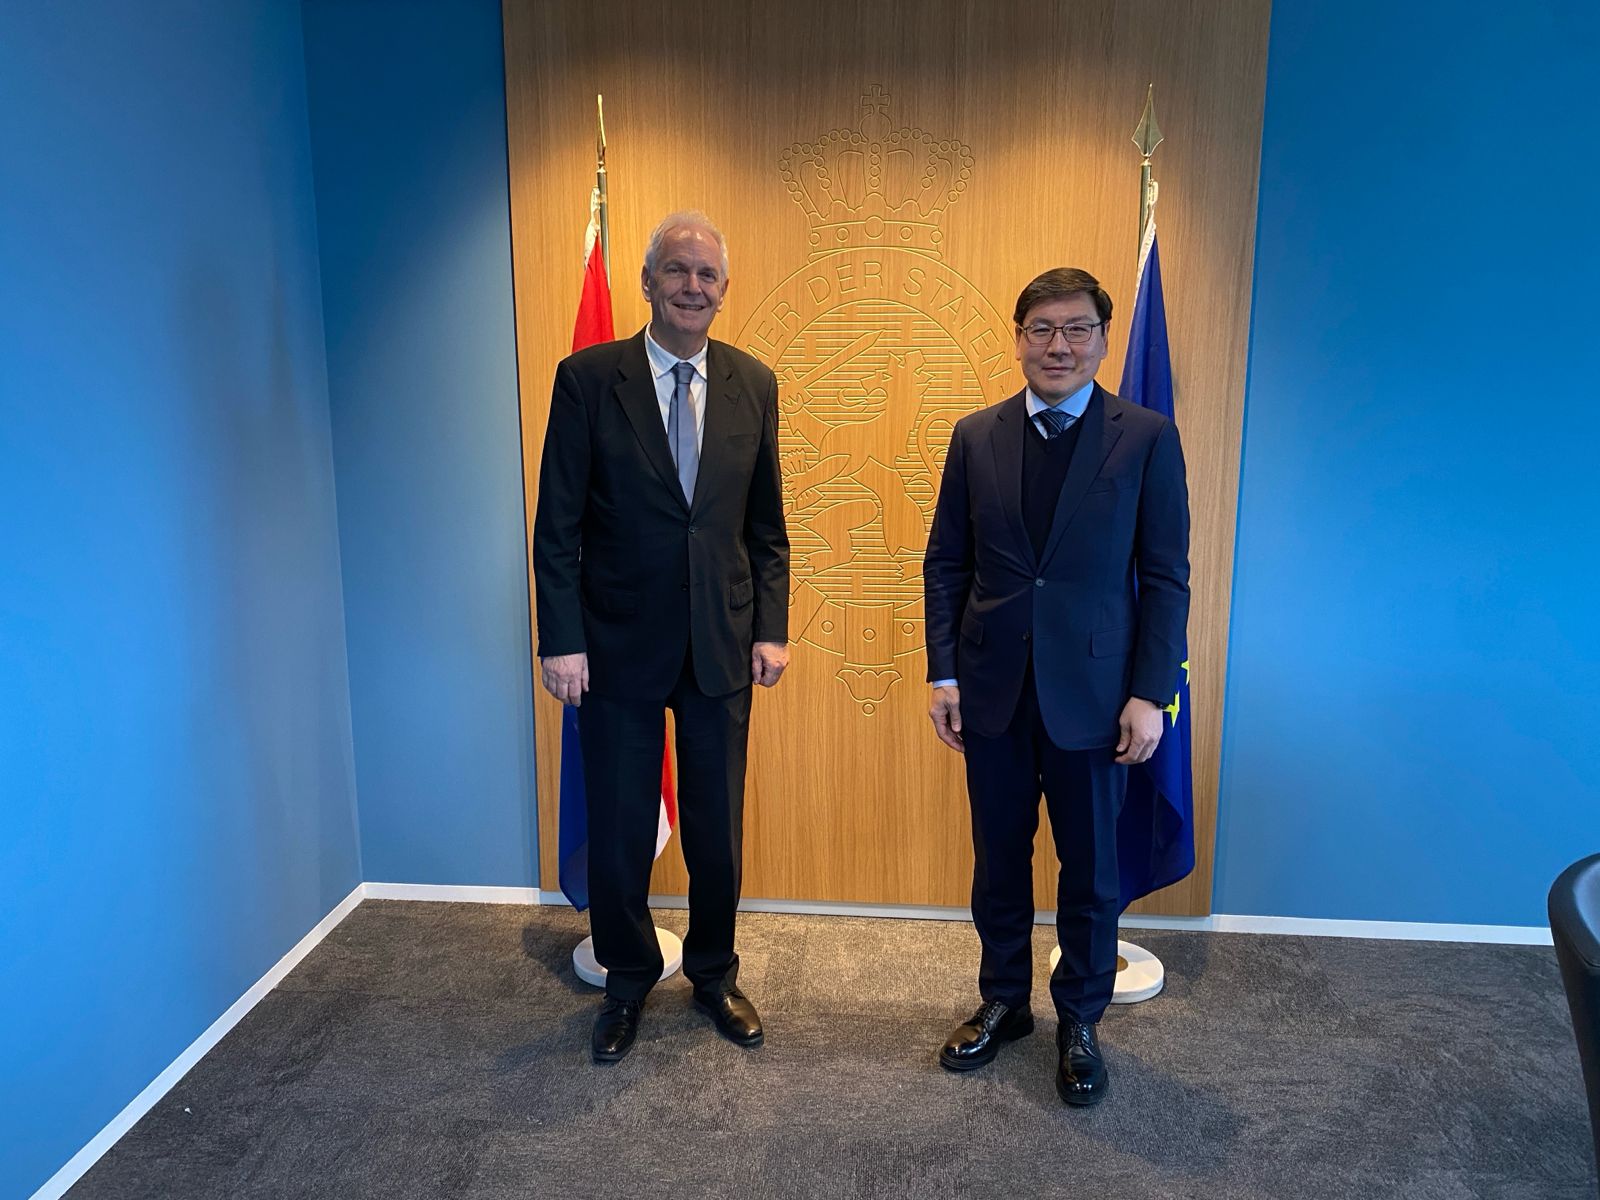 On February 28 this year, Ambassador Extraordinary and Plenipotentiary of the Republic of Kazakhstan A.Zhumagaliyev met with Chairman of the International Affairs Committee of the Lower House of the Parliament of the Kingdom Raymond de Roon in the building of the Parliament of the Netherlands.